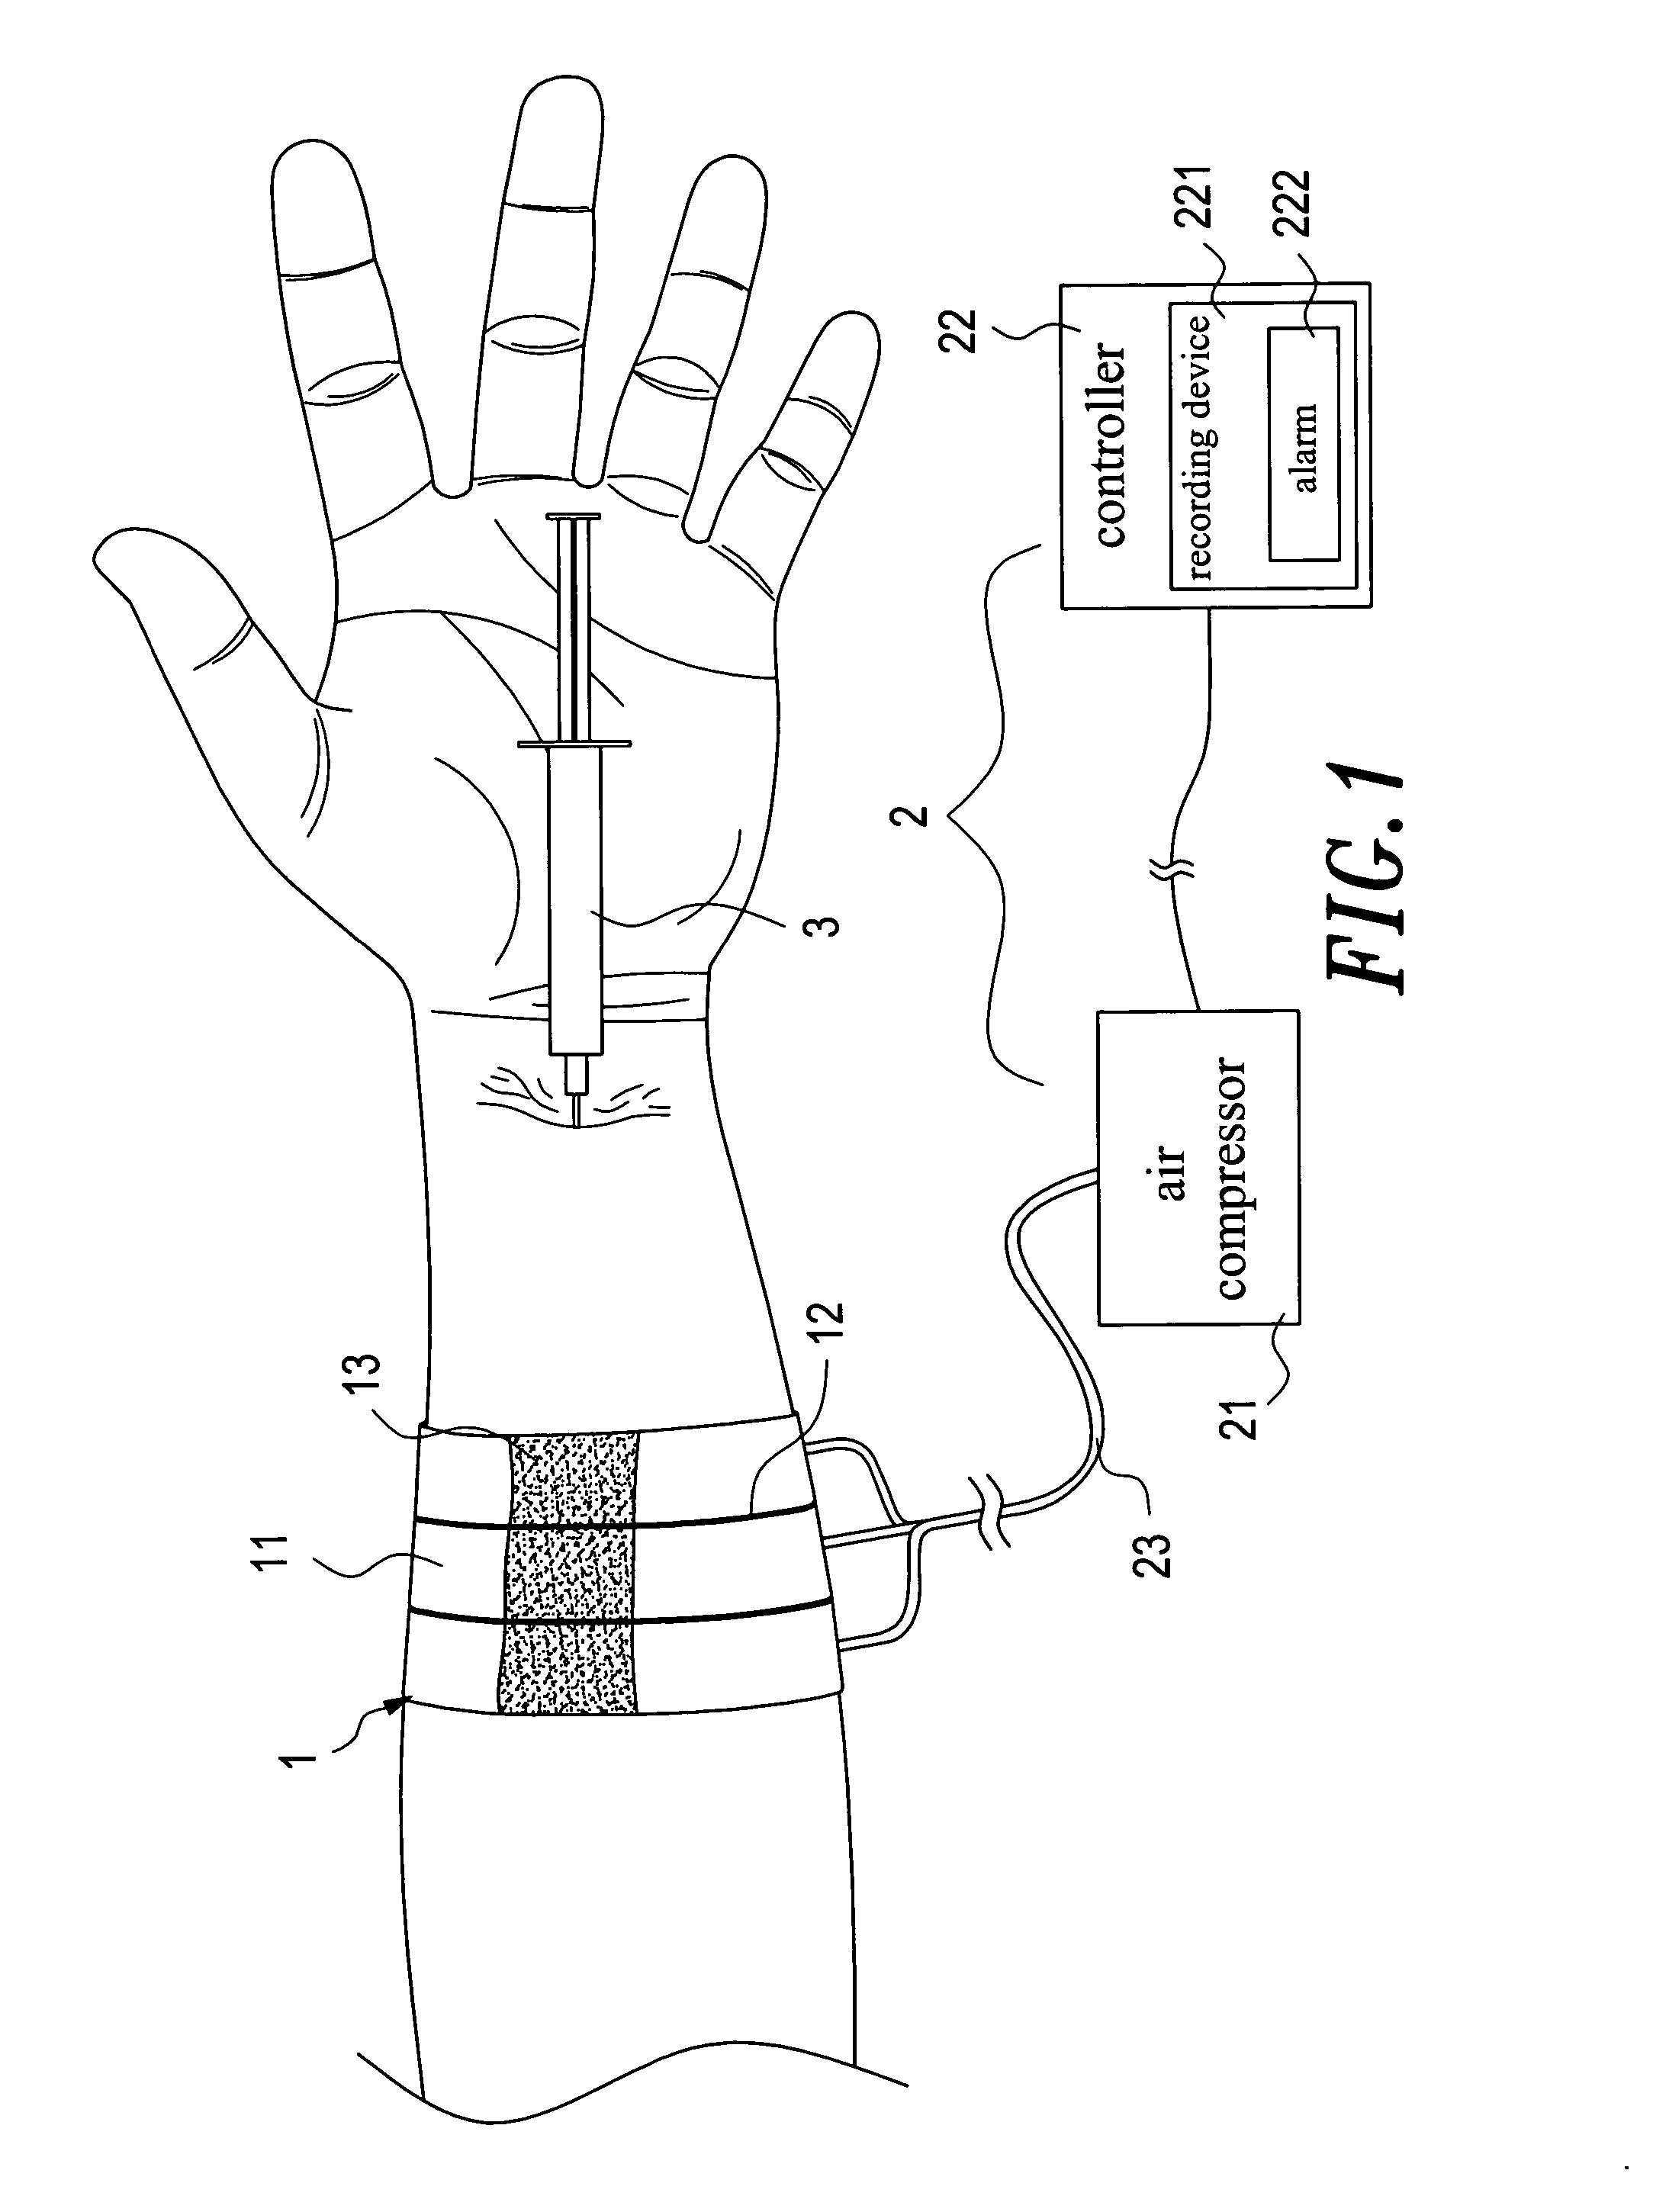 Aspiration and delivery safety system